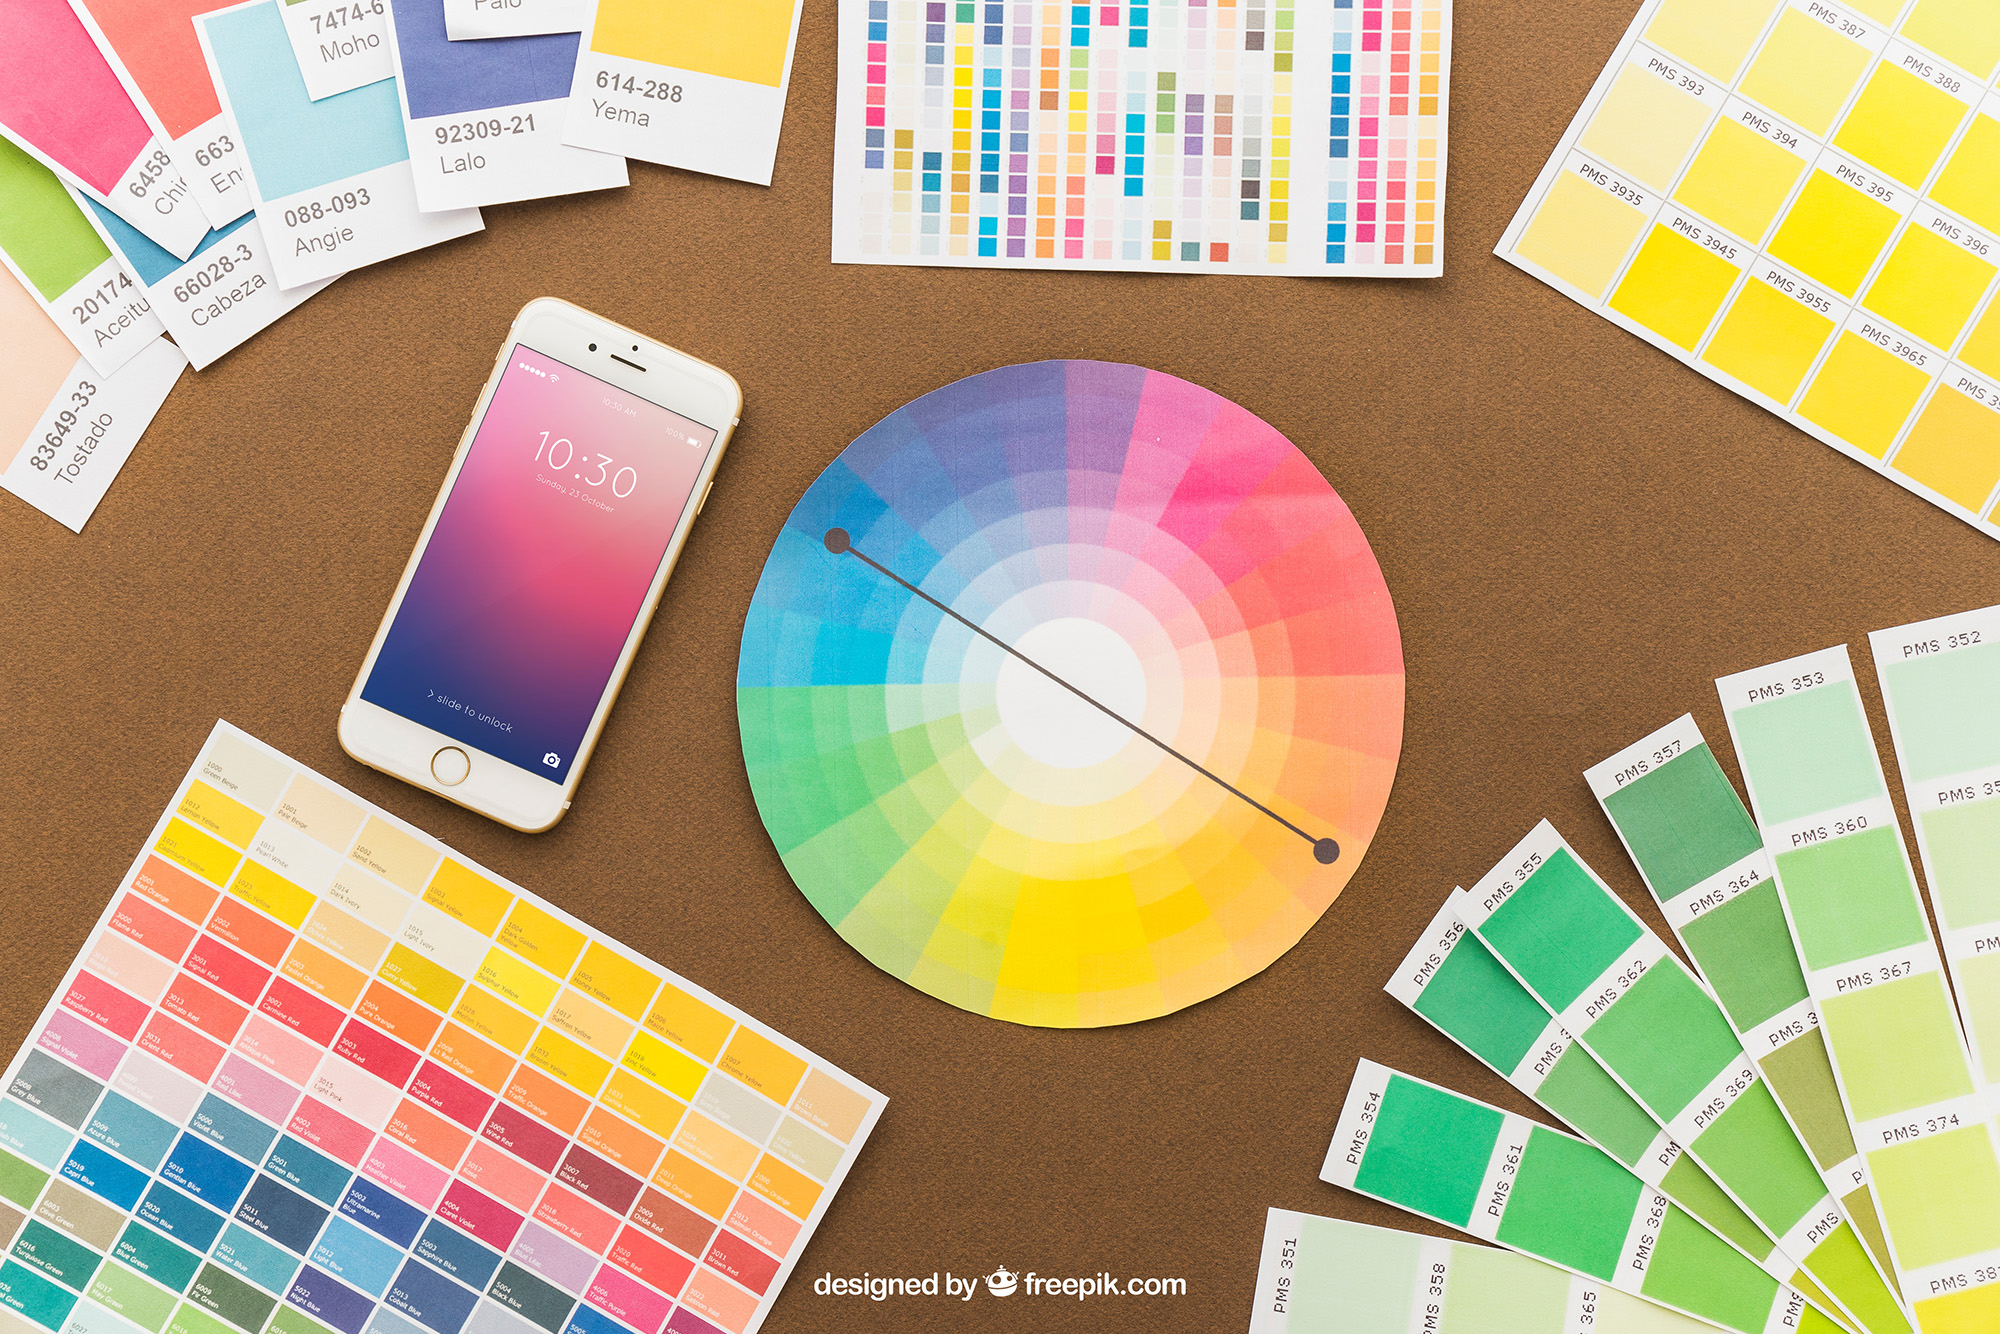 How to Use Colour Harmonies for Effective Design